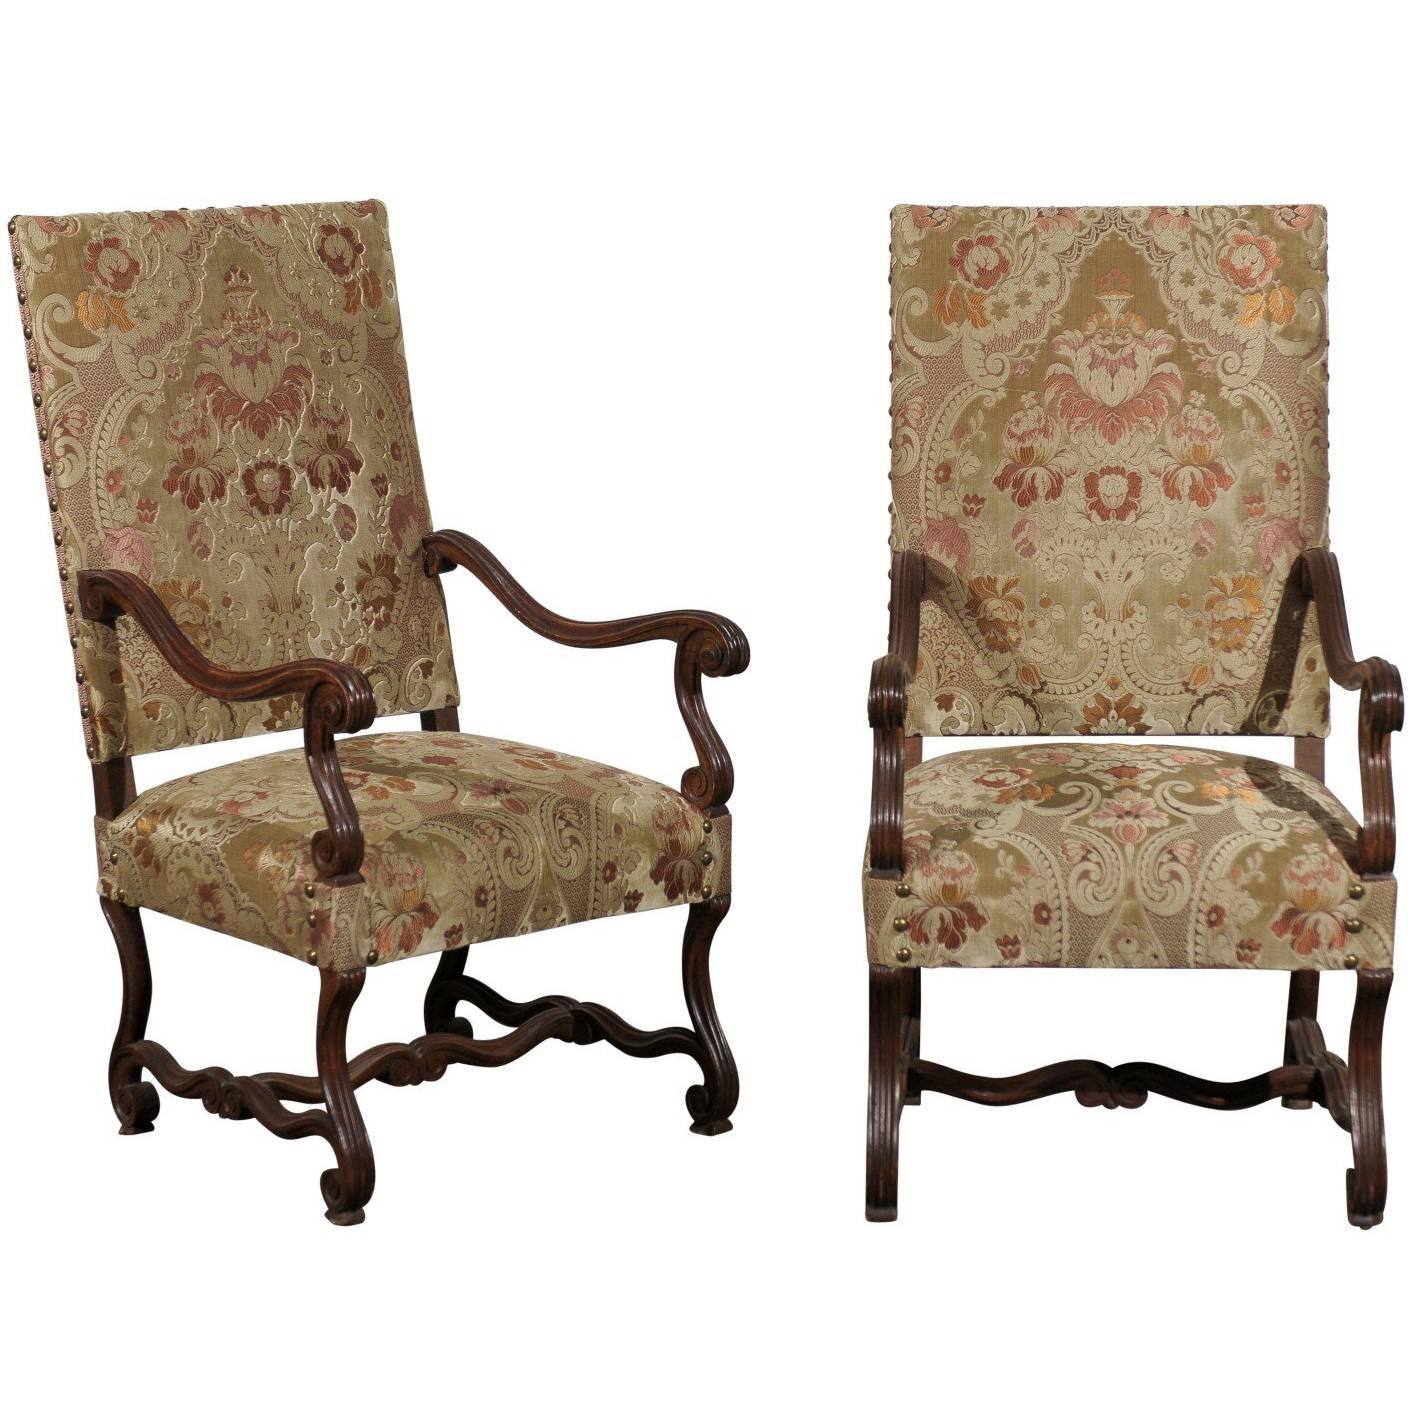 Pair of 19th Century French Walnut High Back Chairs